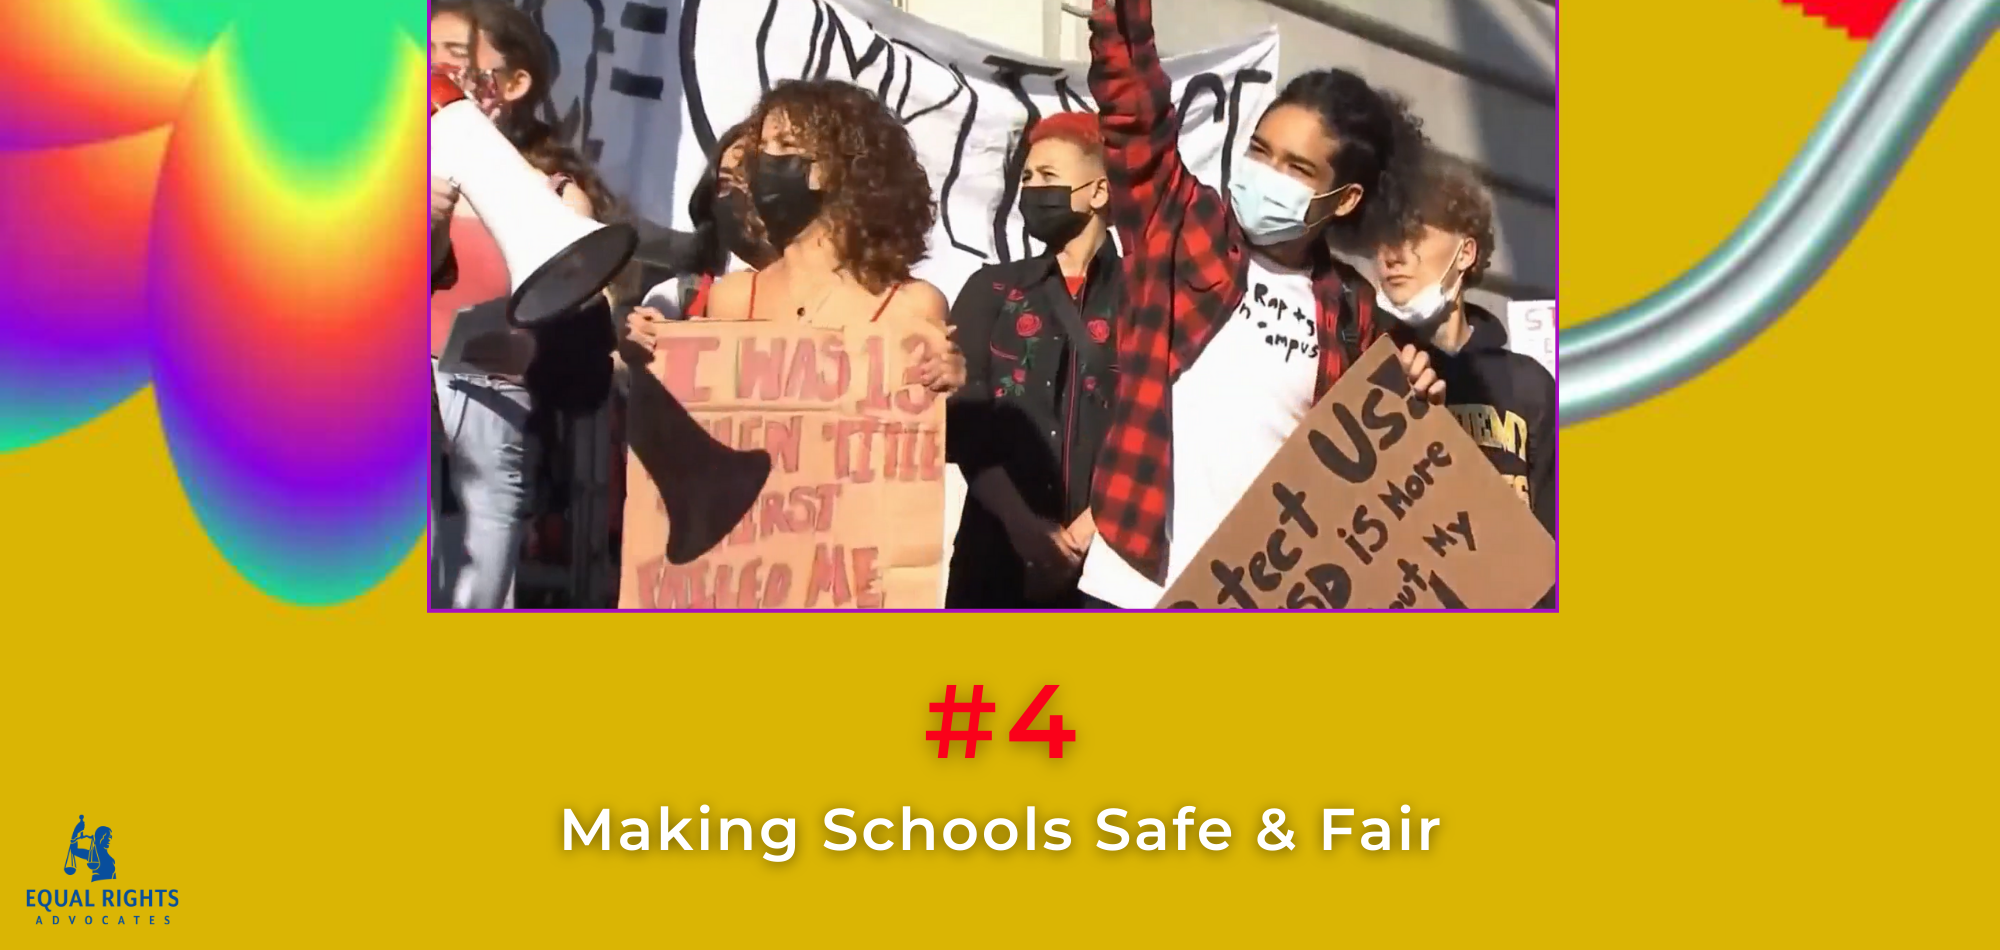 Mustard yellow image with silver chrome swirl and a psychedelic rainbow flower. At the top, a photo showing students wearing masks and protesting outside, holding signs about their safety and rights. One student's fist is raised in the air. Underneath, text: #4 Making Schools Safe & Fair